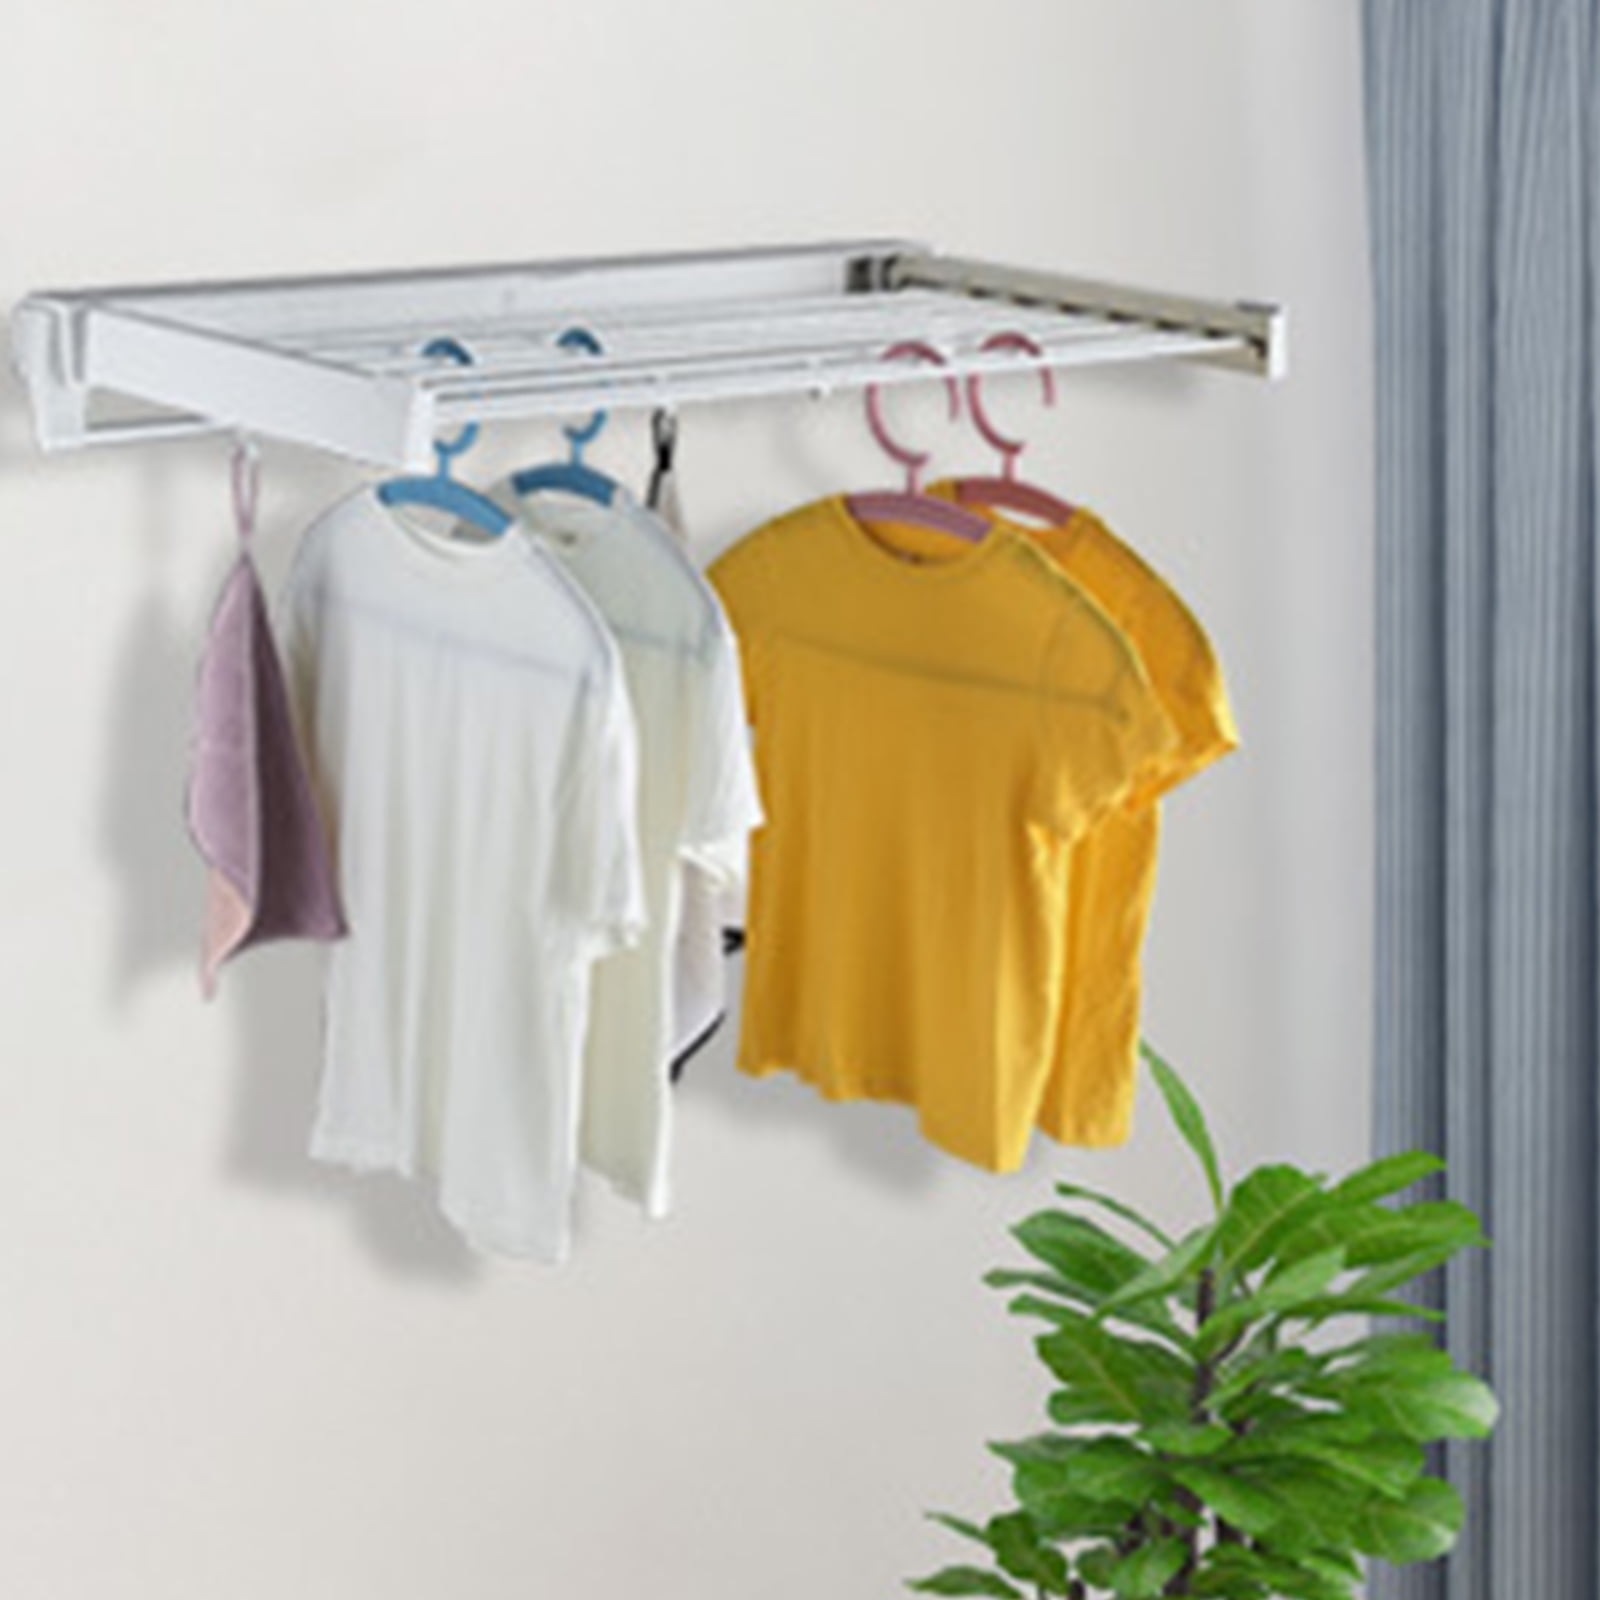 MISSMIN 2 Pack Retractable Clothes Rack - Wall Mounted Folding Clothes  Hanger Drying Rack for Laundry Room Closet Storage Organization, (Silver)